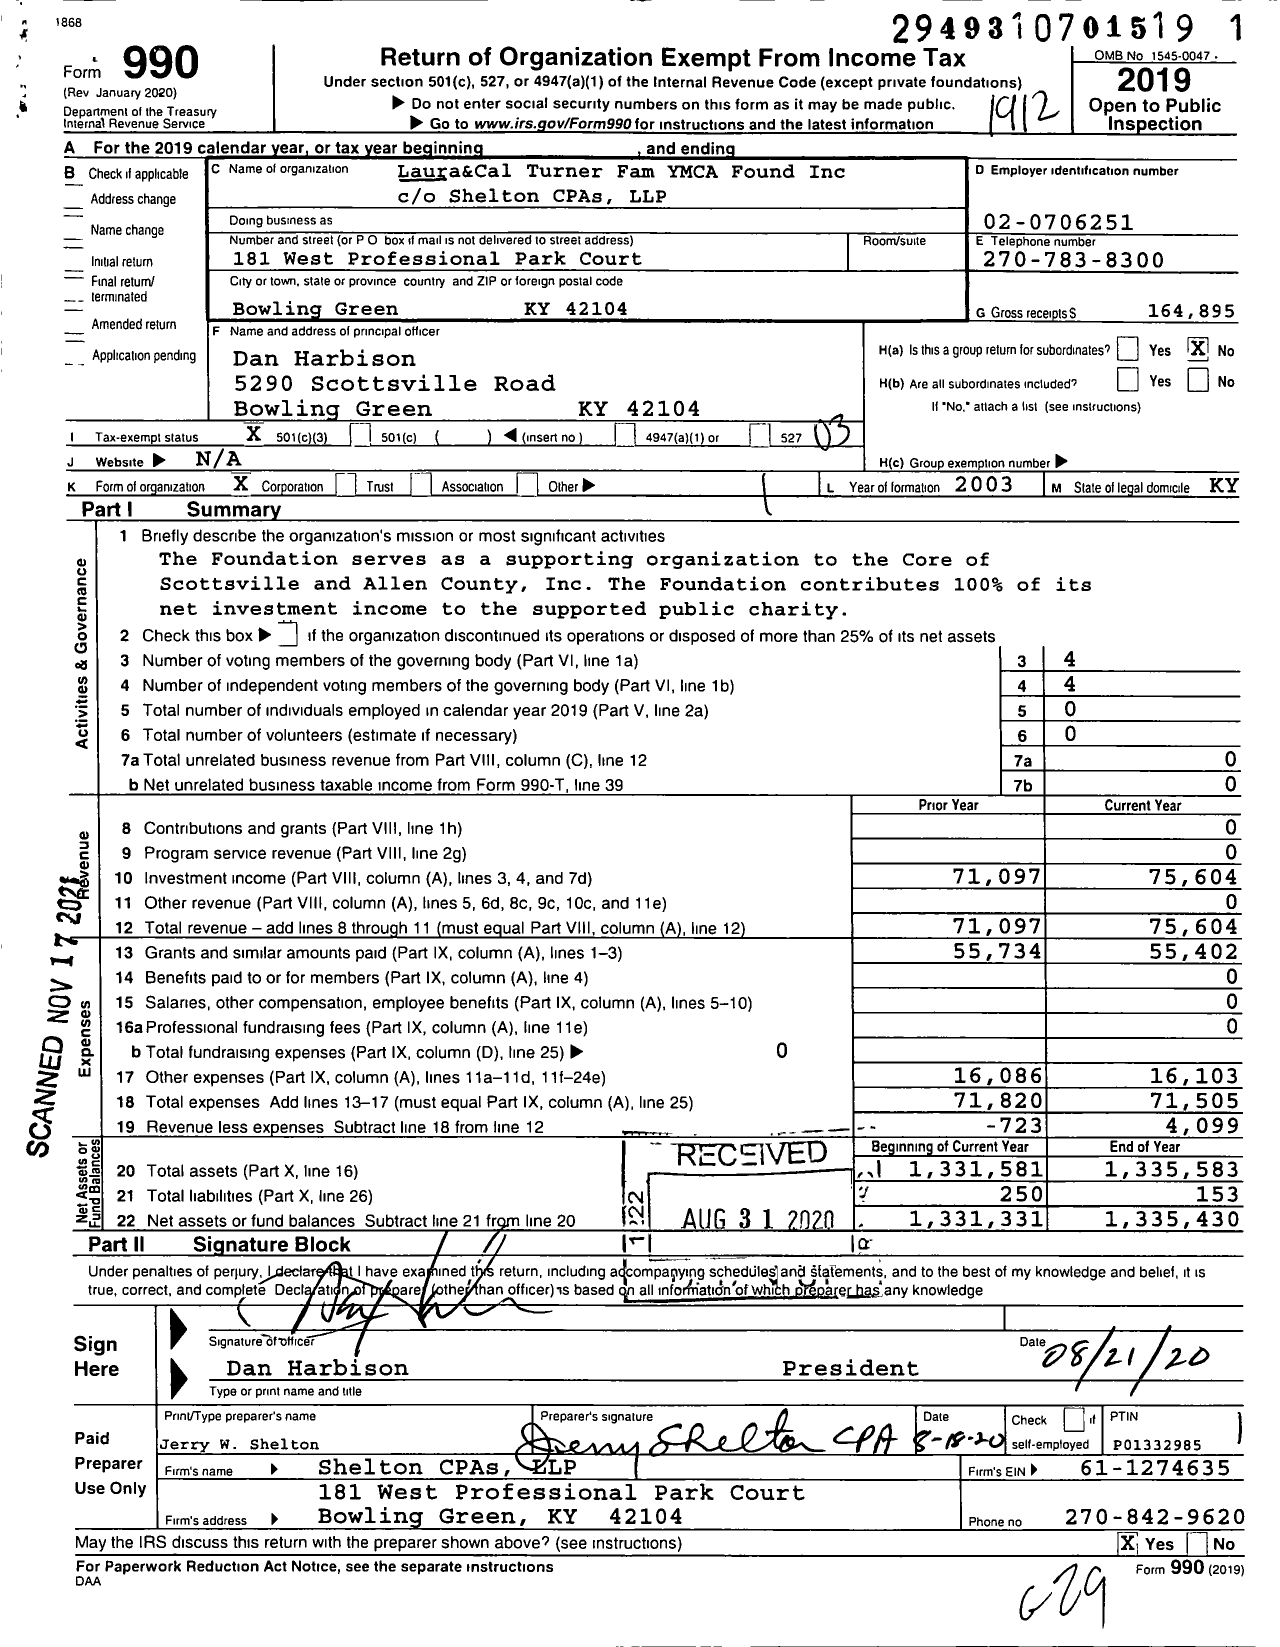 Image of first page of 2019 Form 990 for Laura&cal Turner Family Ymca Foundation